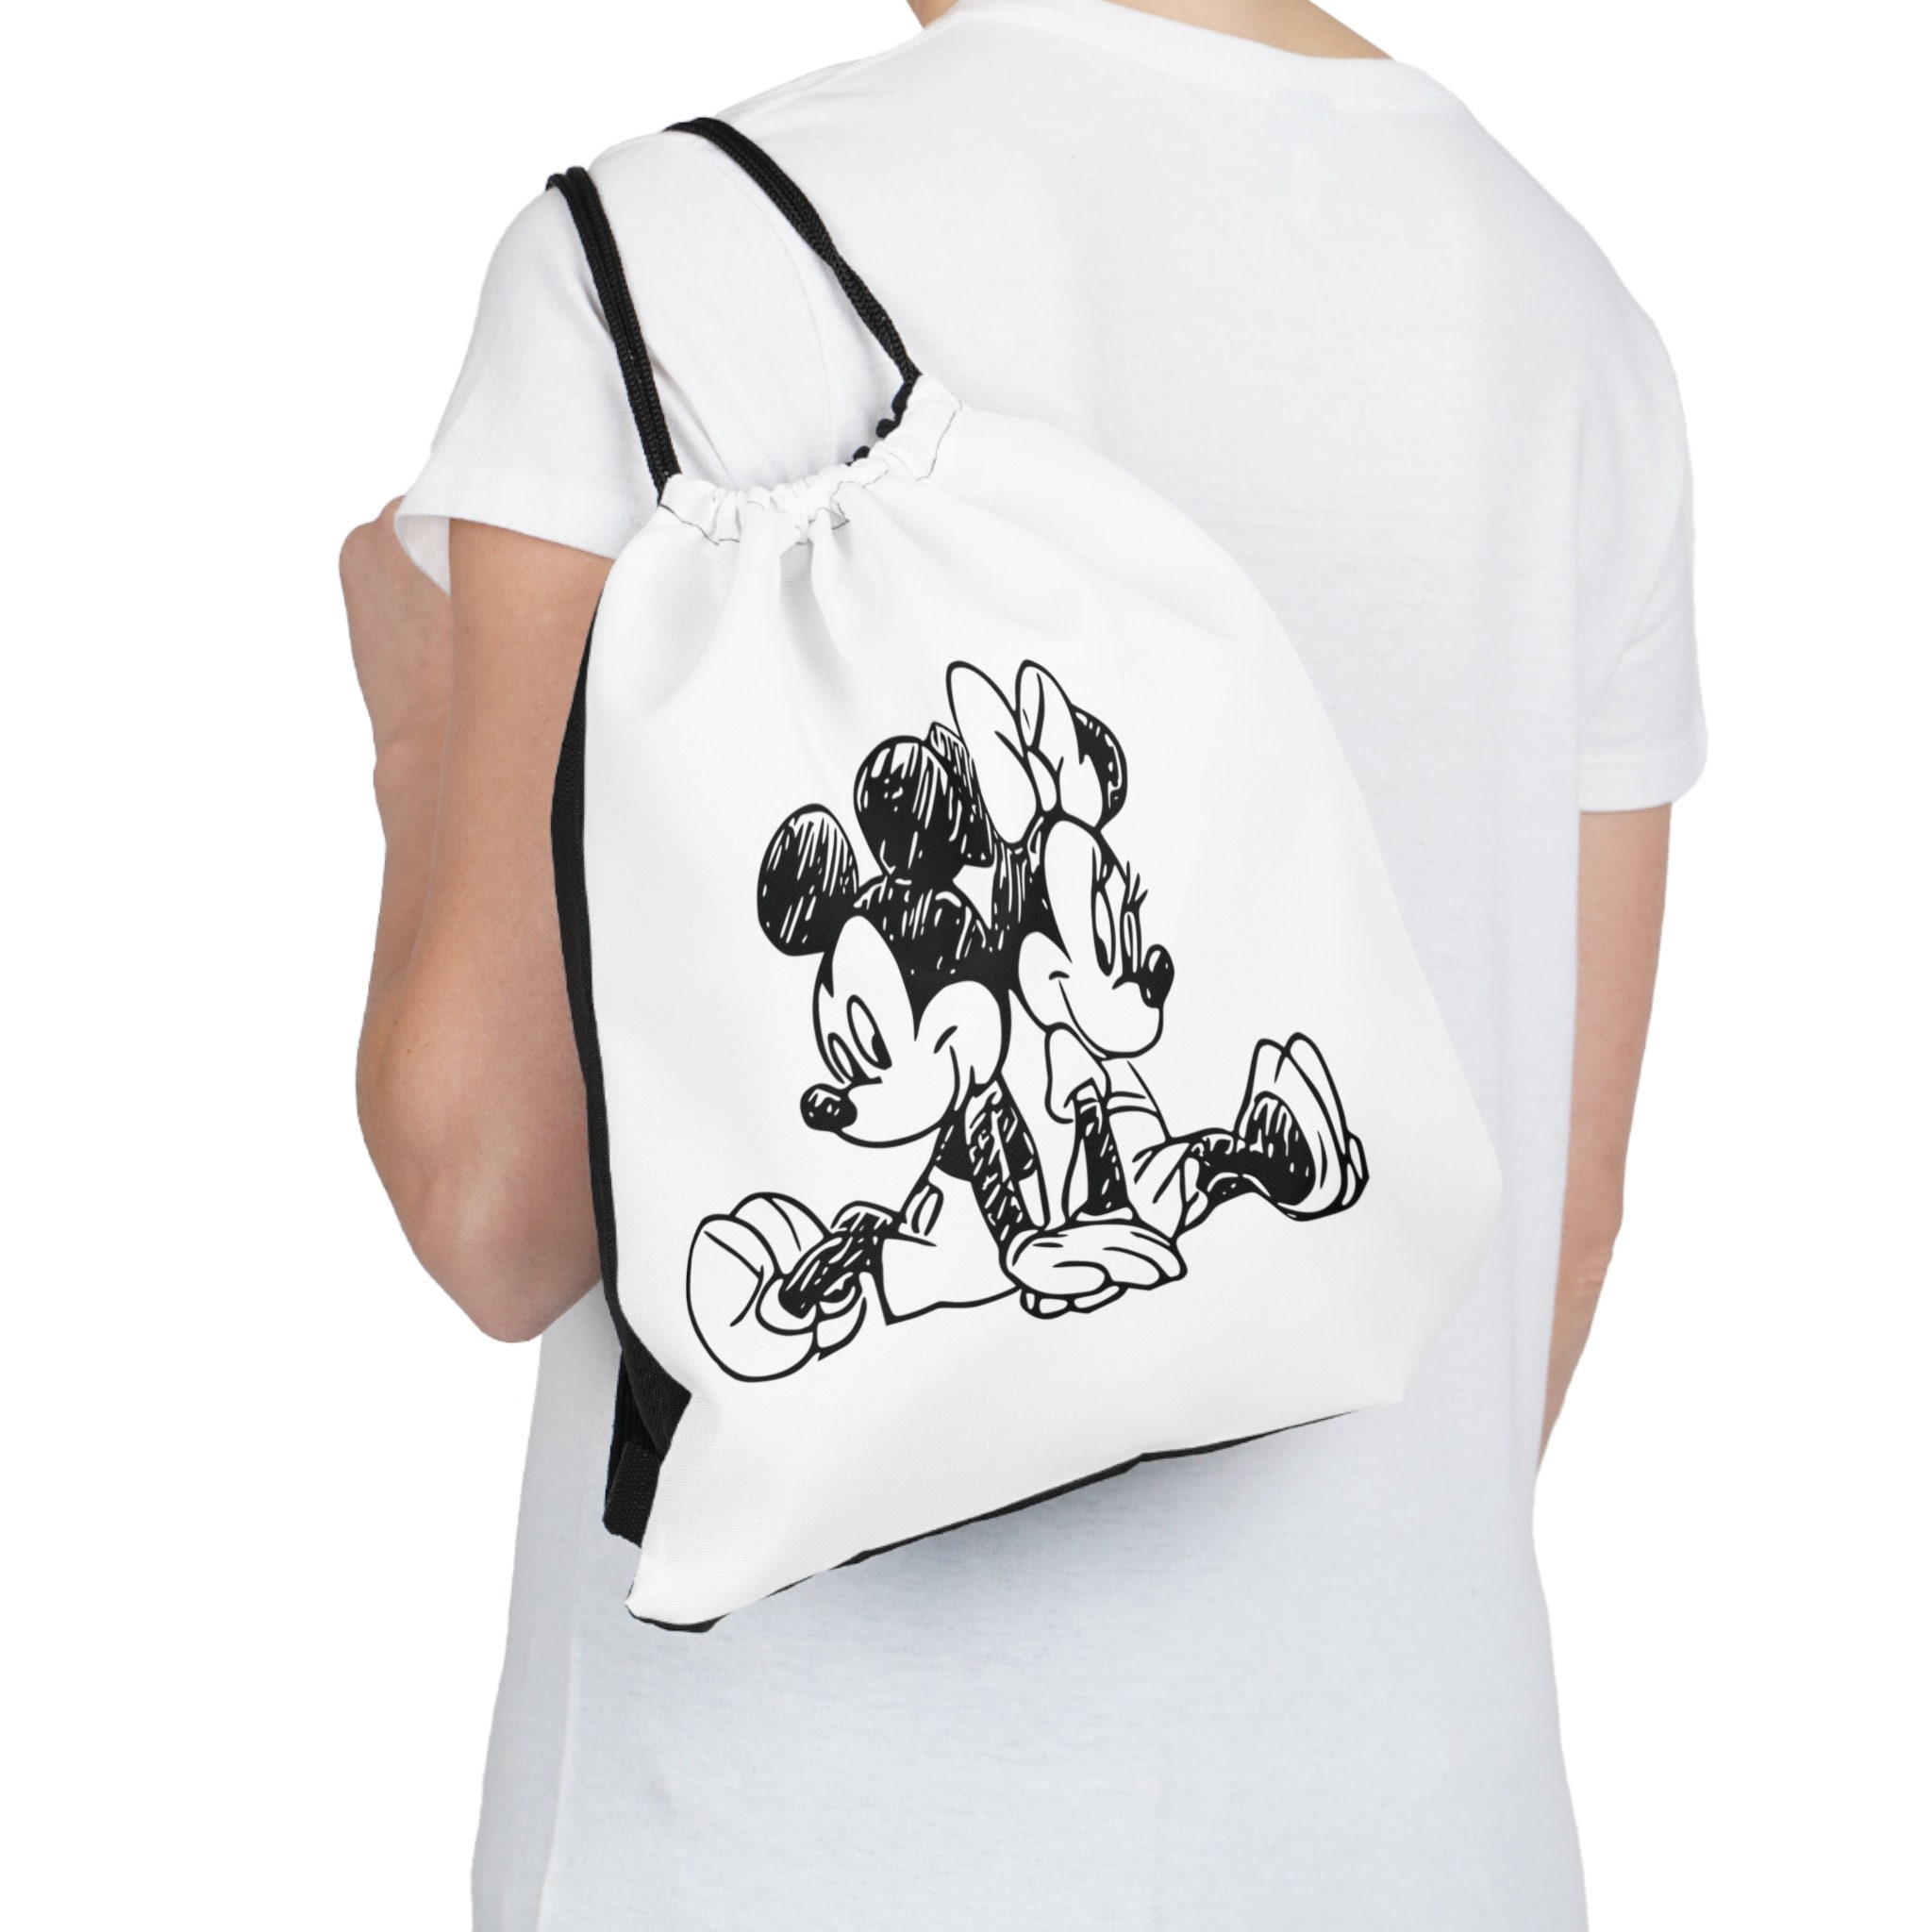 Discover Outdoor Drawstring Bag - Mickey & Minnie